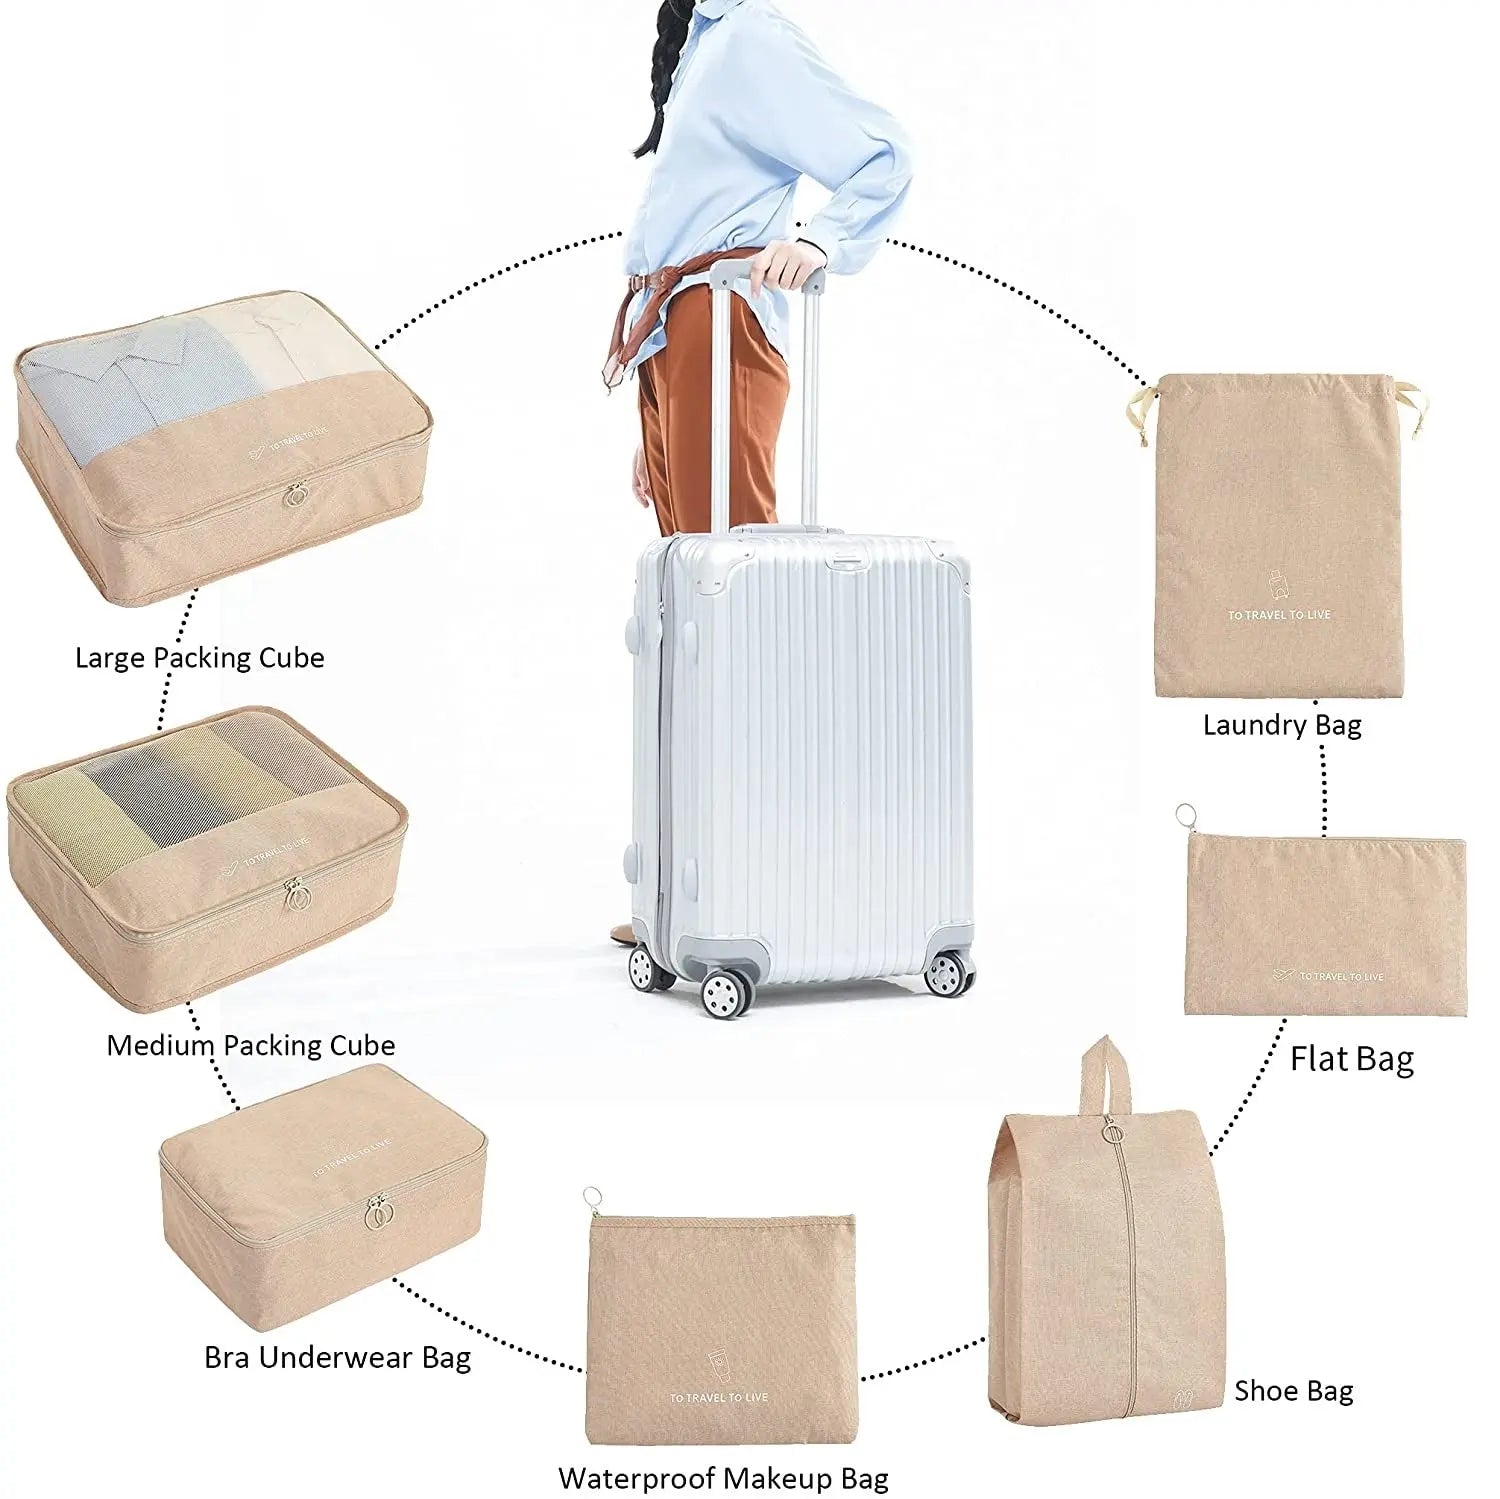 These Labeled Packing Cubes Are the Travel Hack I Wish I Learned About  Years Ago